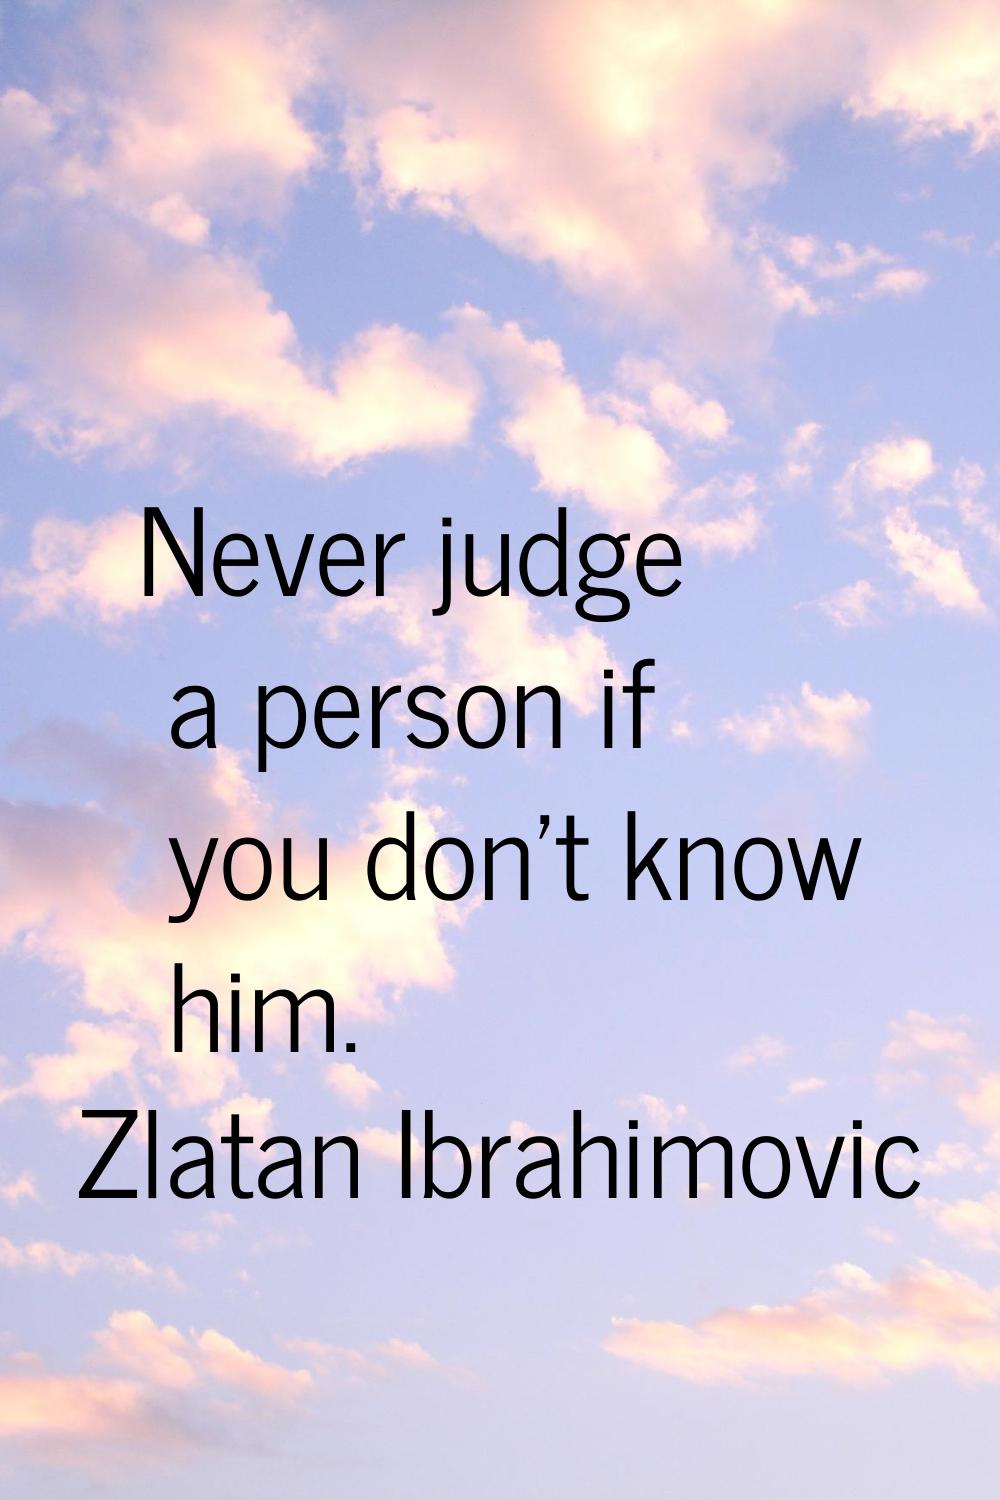 Never judge a person if you don't know him.